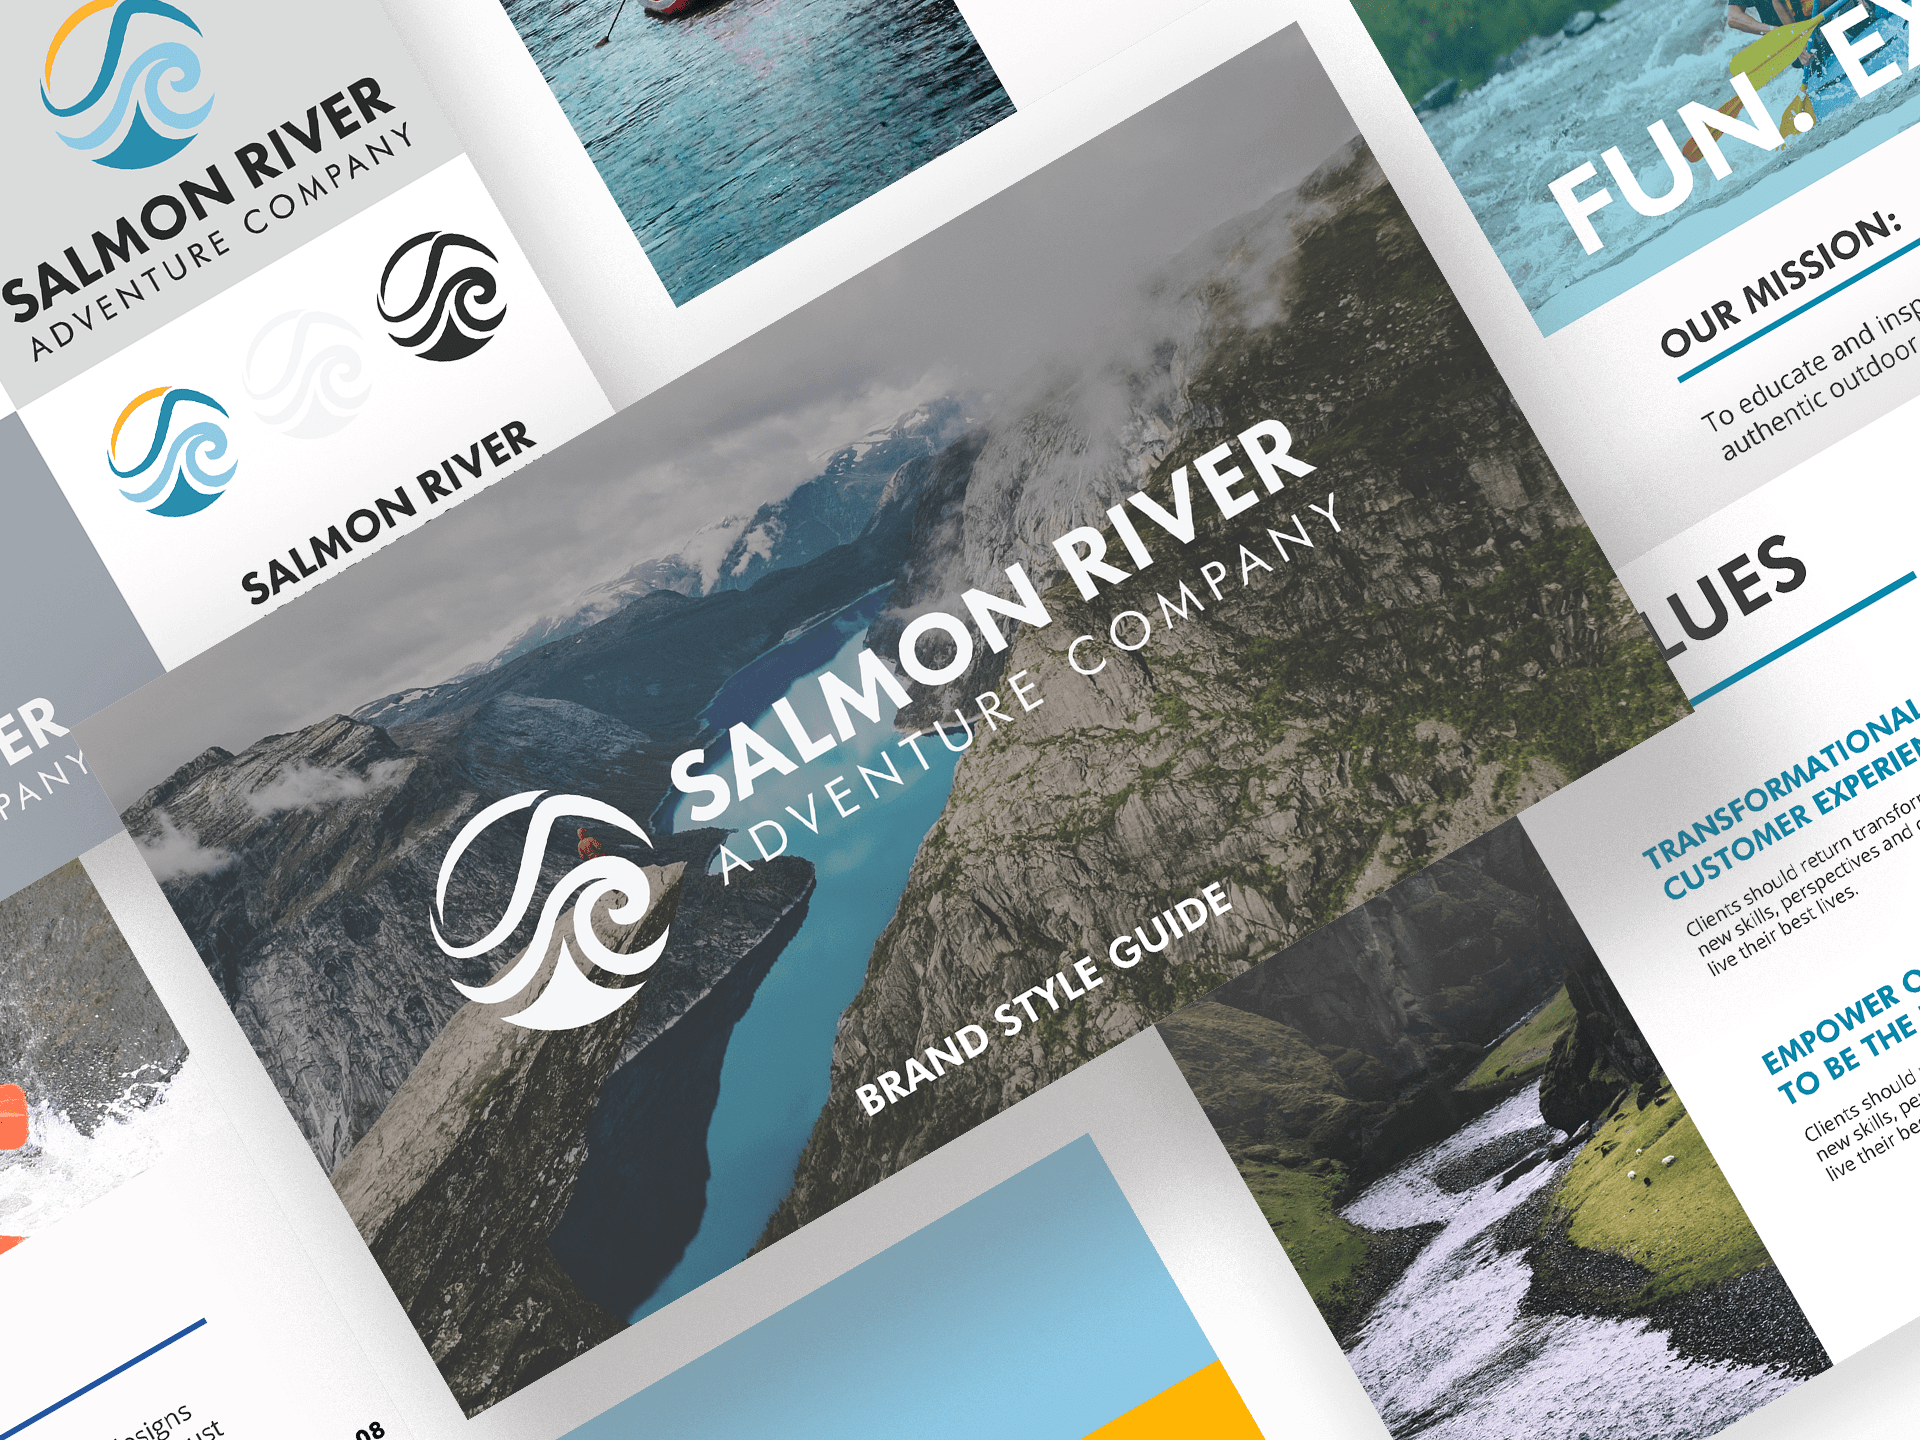 Salmon river full brand style guide mockup - brand strategy development Big Red Jelly